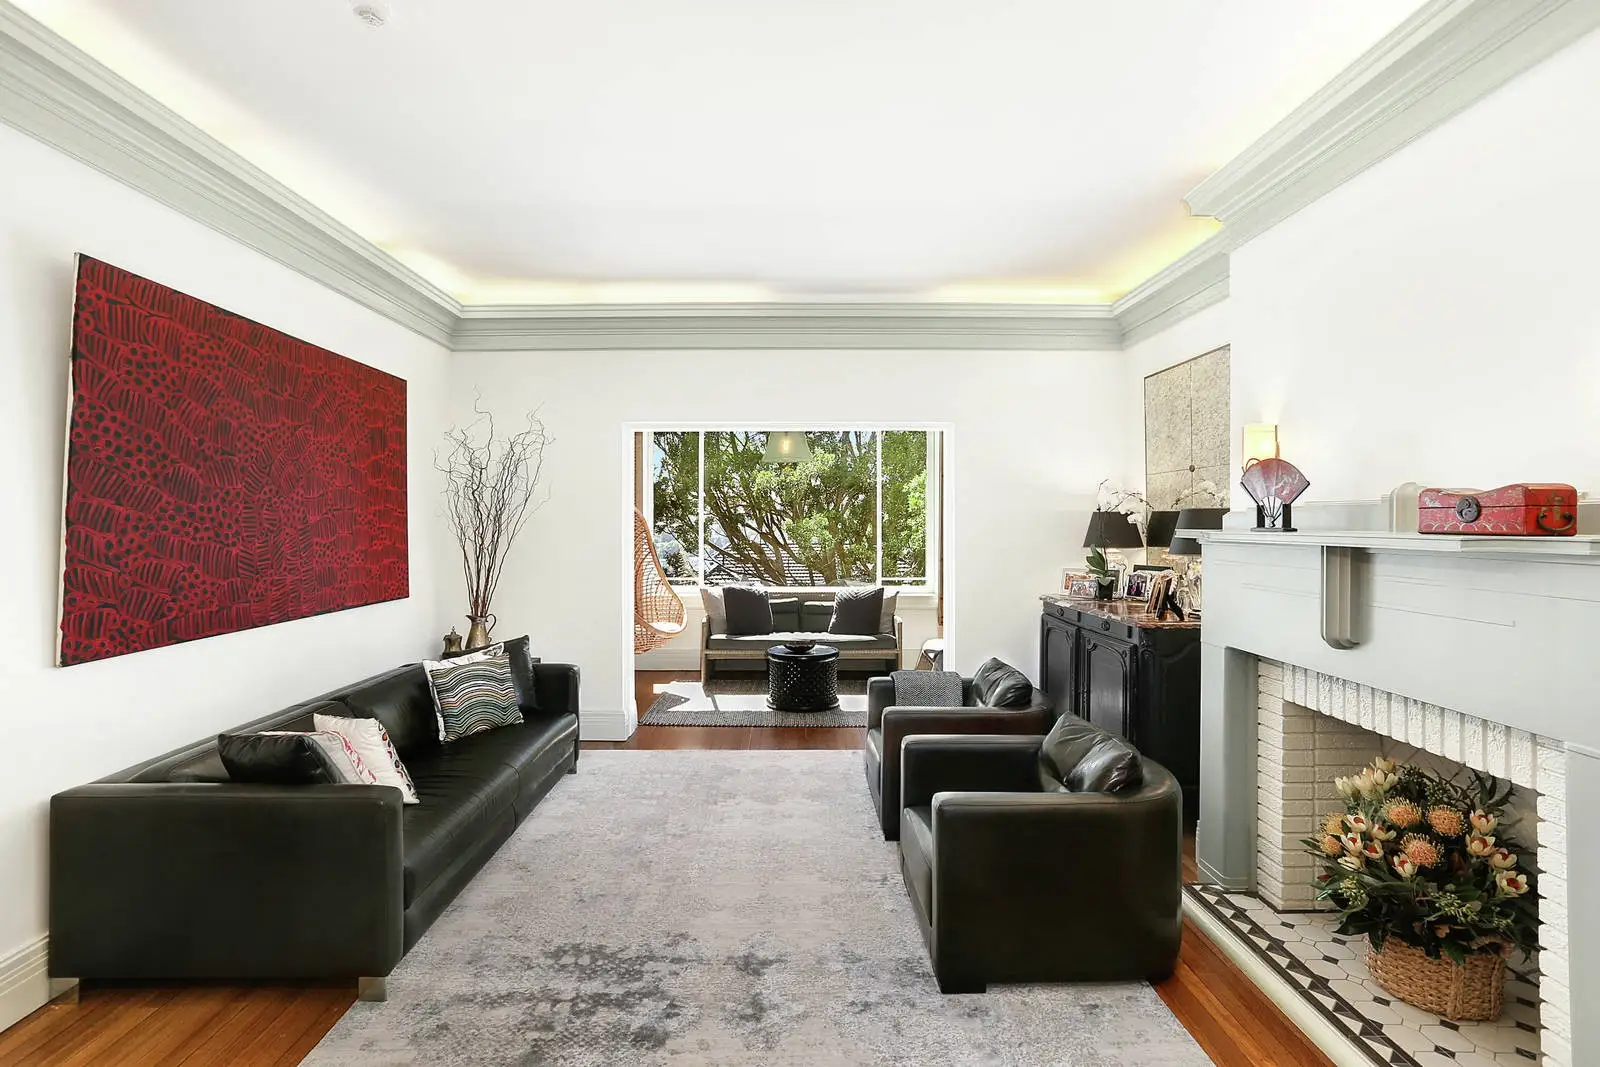 Photo #1: 4/410 Edgecliff Road, Woollahra - Sold by Sydney Sotheby's International Realty